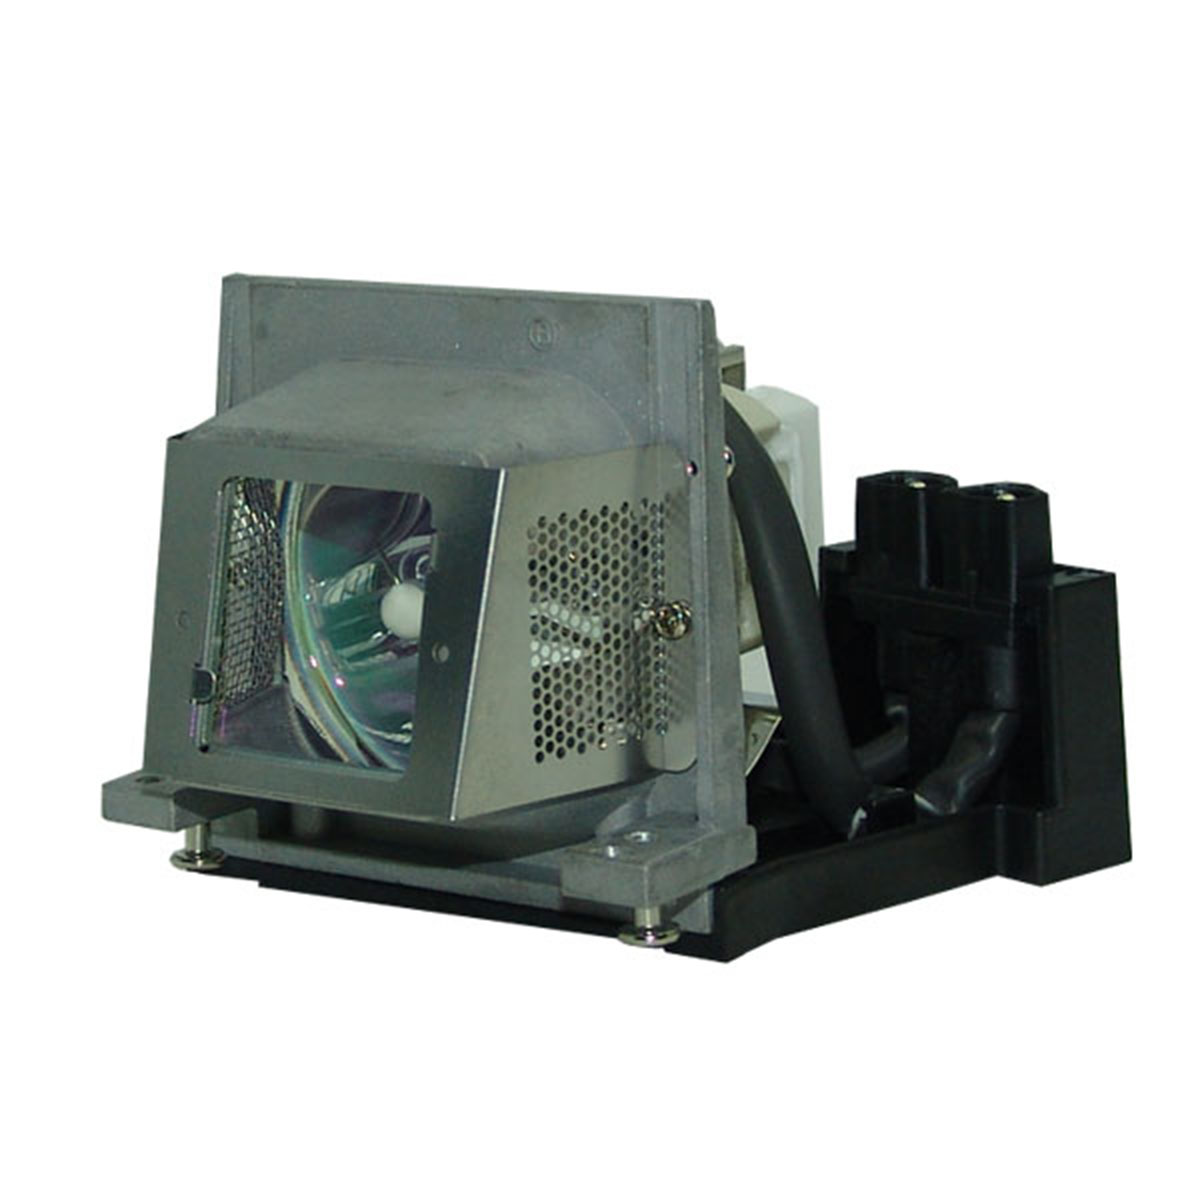 Buyquest EIP-X280  Genuine Compatible Replacement Projector Lamp for Eiki. Includes New UHP 280W Bulb and Housing